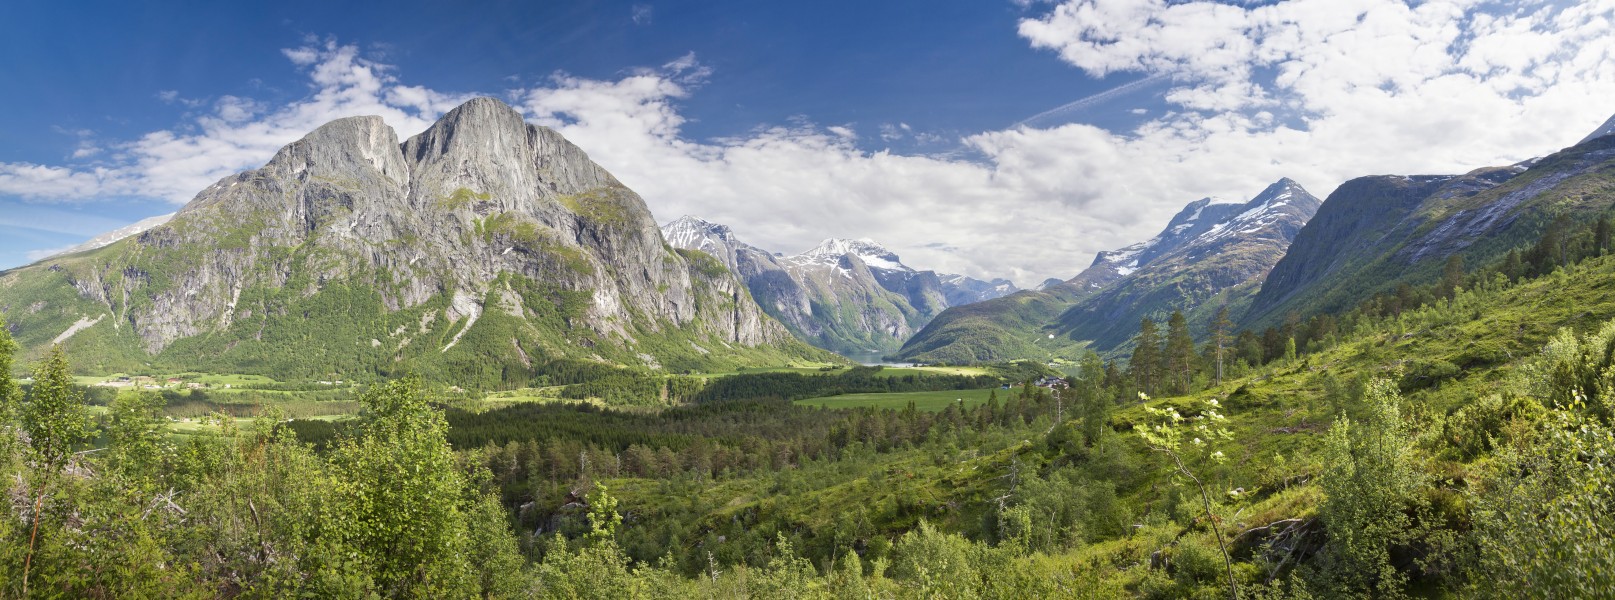 Valley landscape from the northern part of Eikesdalen in Nesset, 2013 June